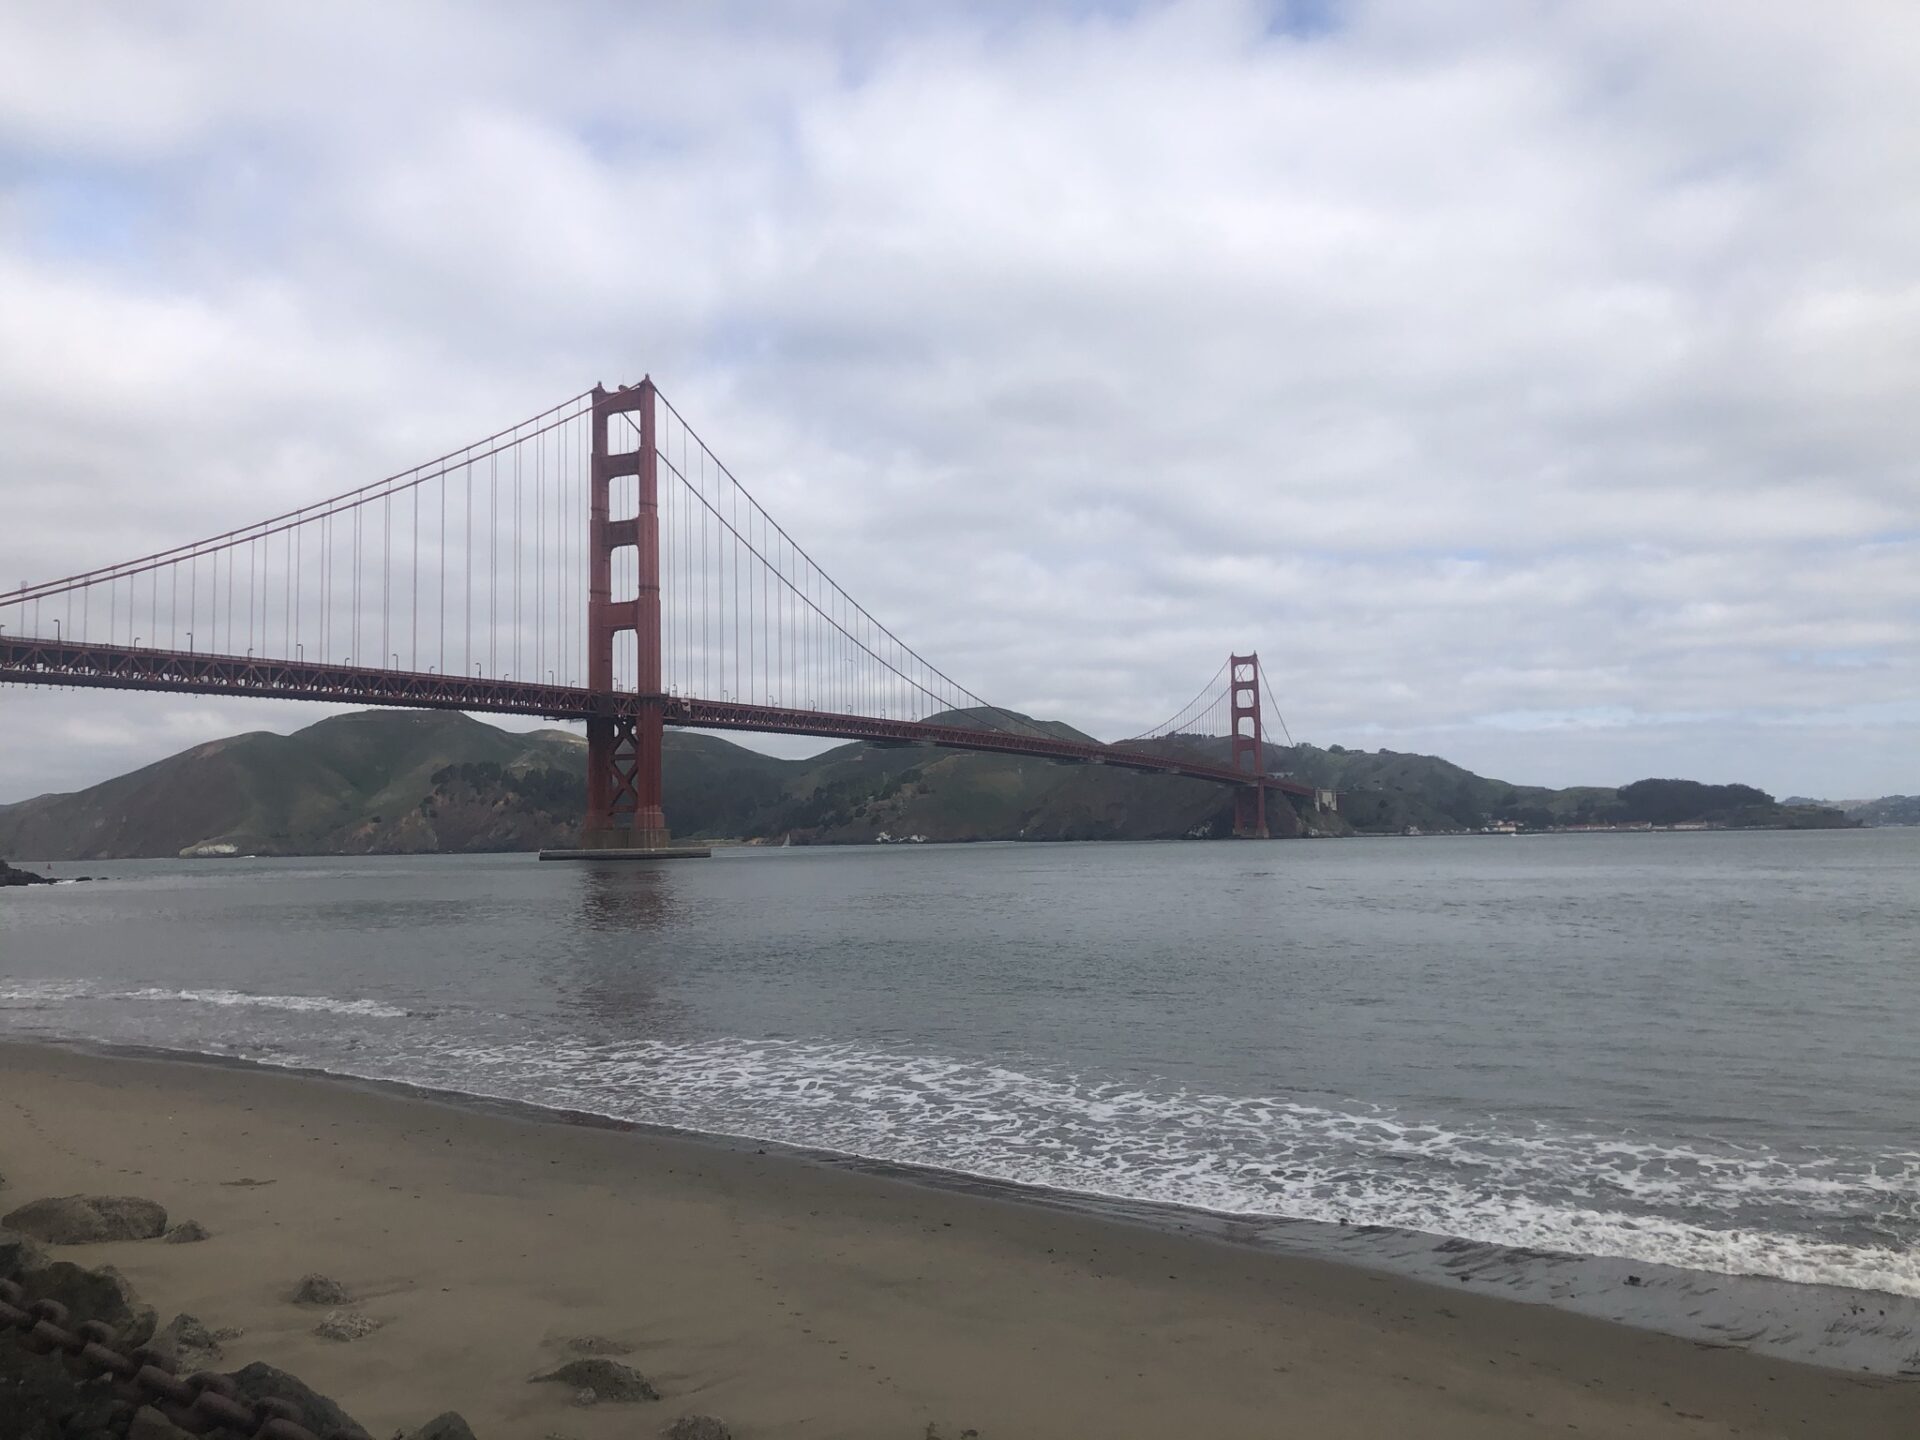 Visiting San Francisco with Kids: Golden Gate Bridge & Where to Go